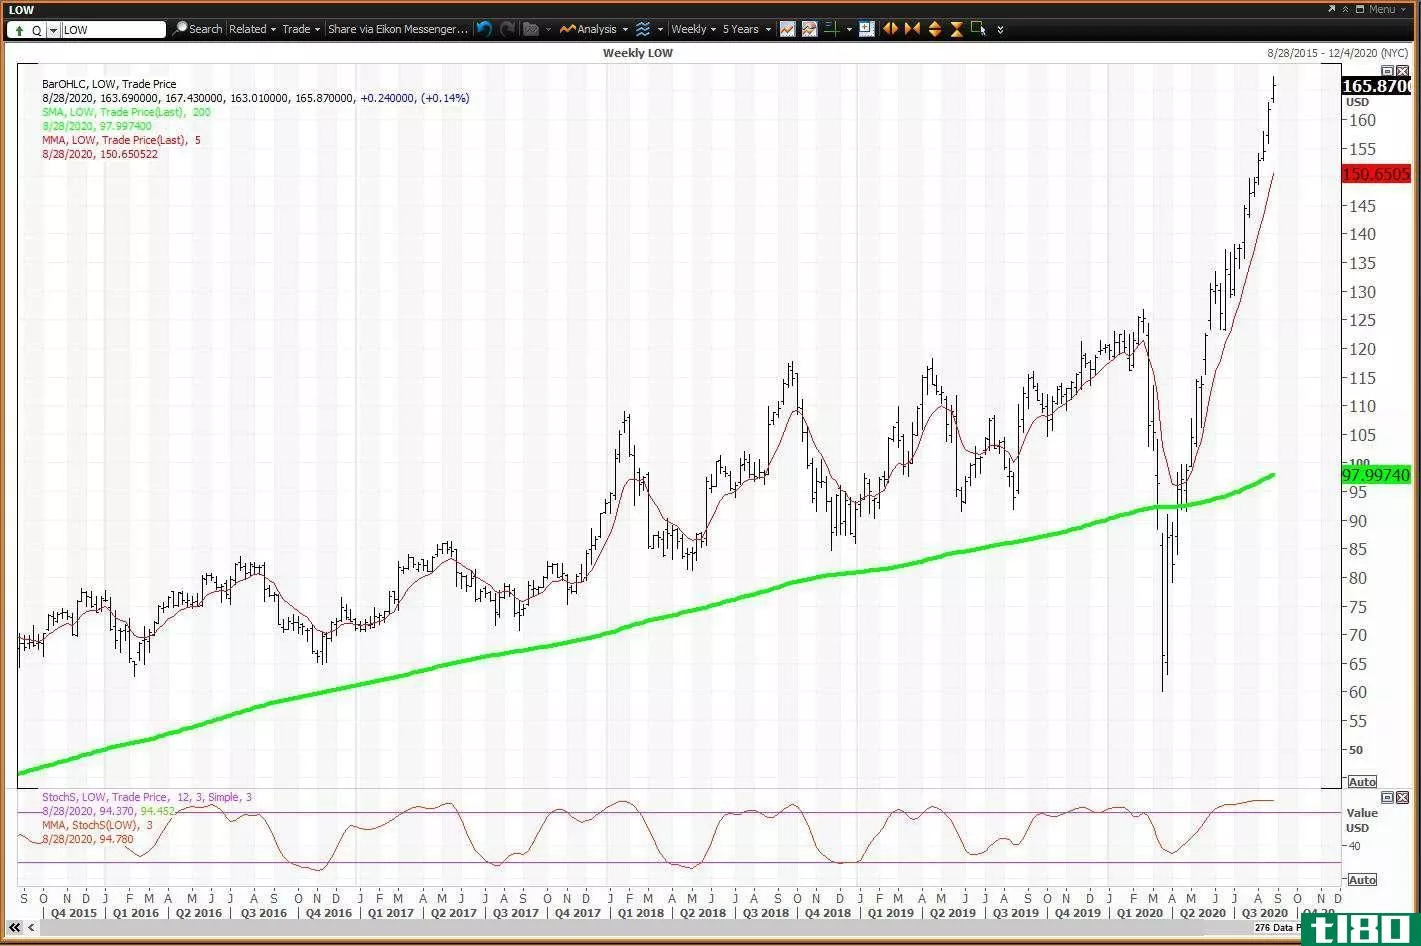 Weekly chart showing the share price performance of Lowe’s Companies, Inc. (LOW)